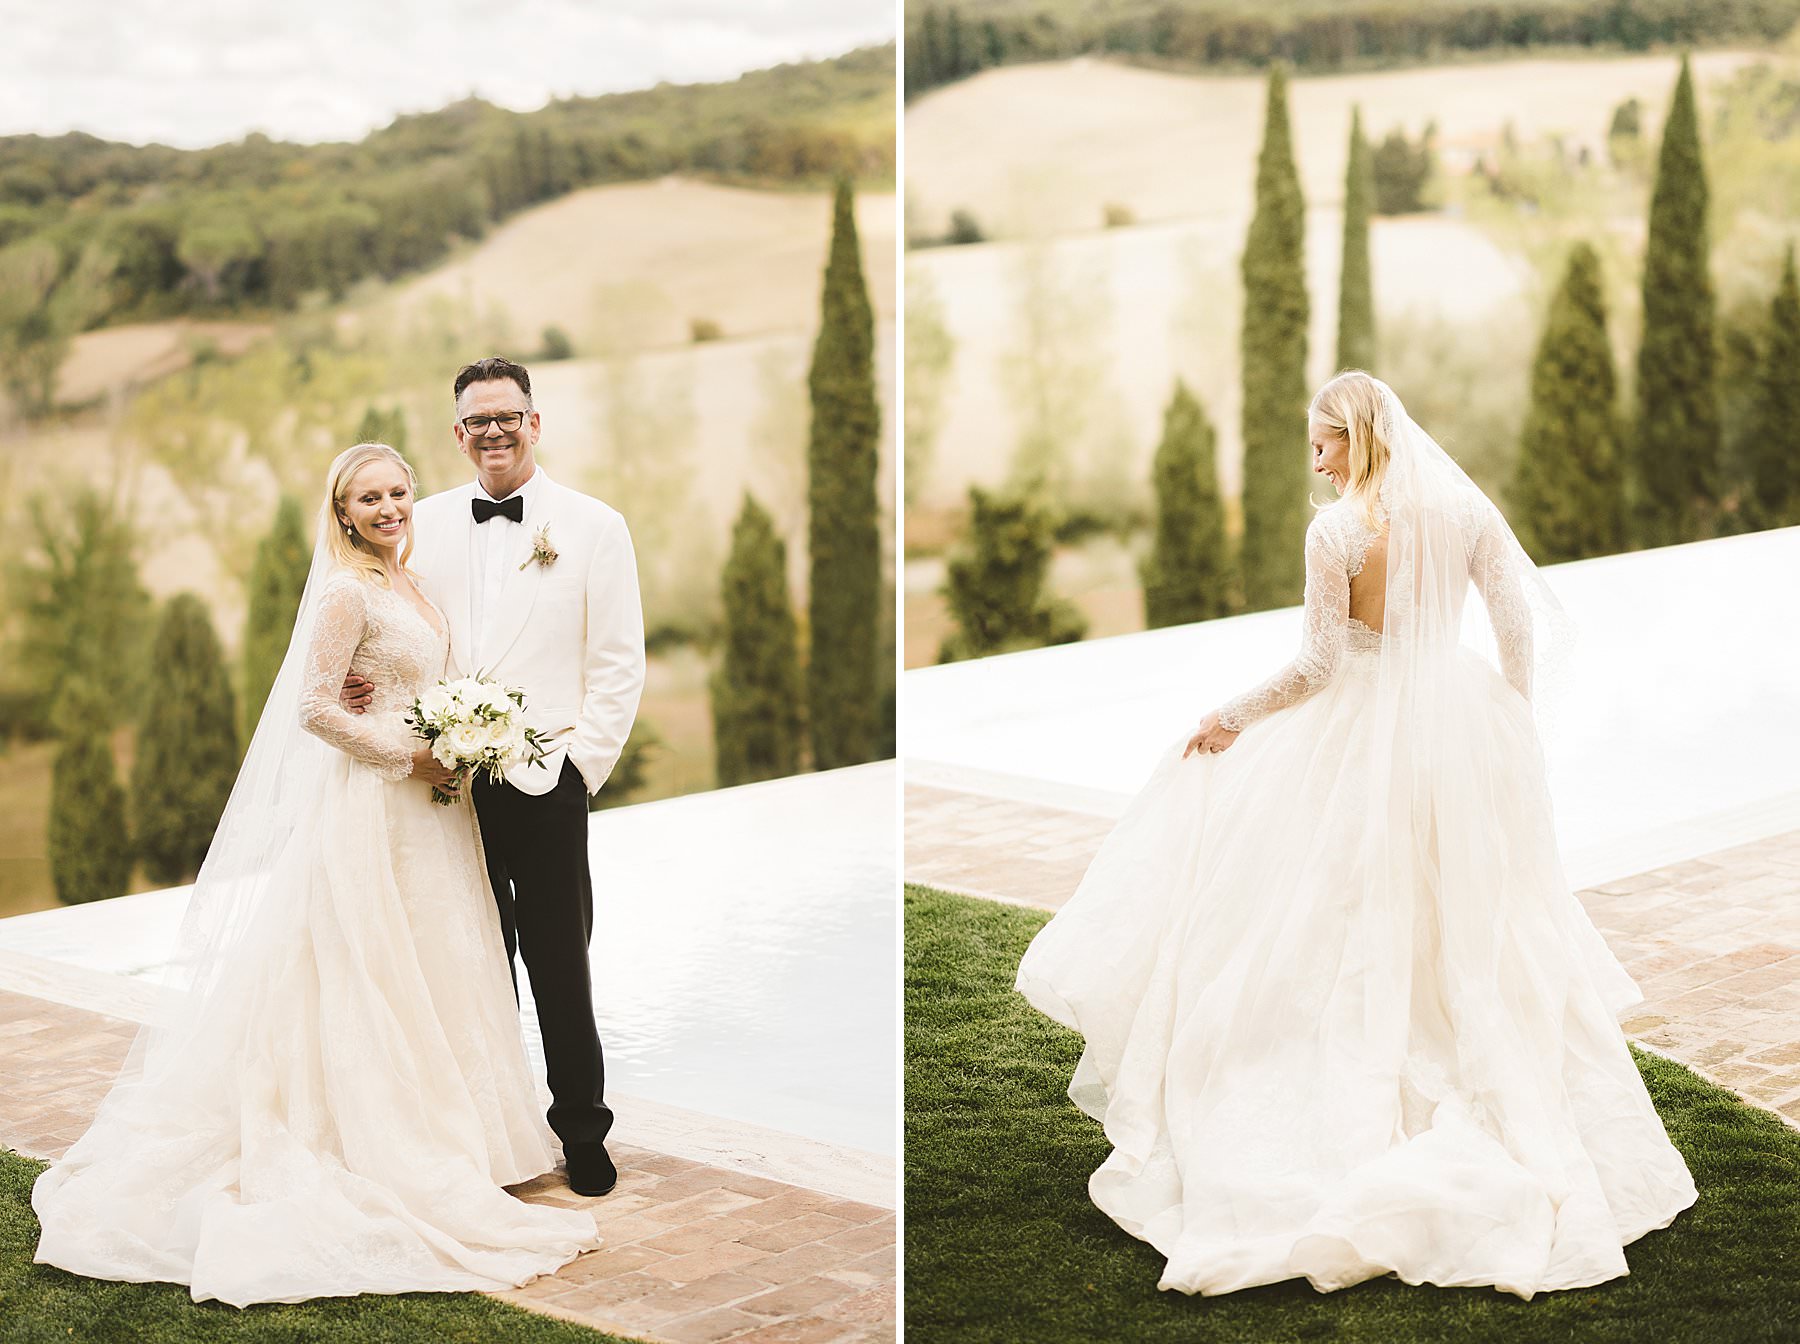 Elegant and timeless elopement wedding portrait in the heart of Tuscany at Borgo Pignano